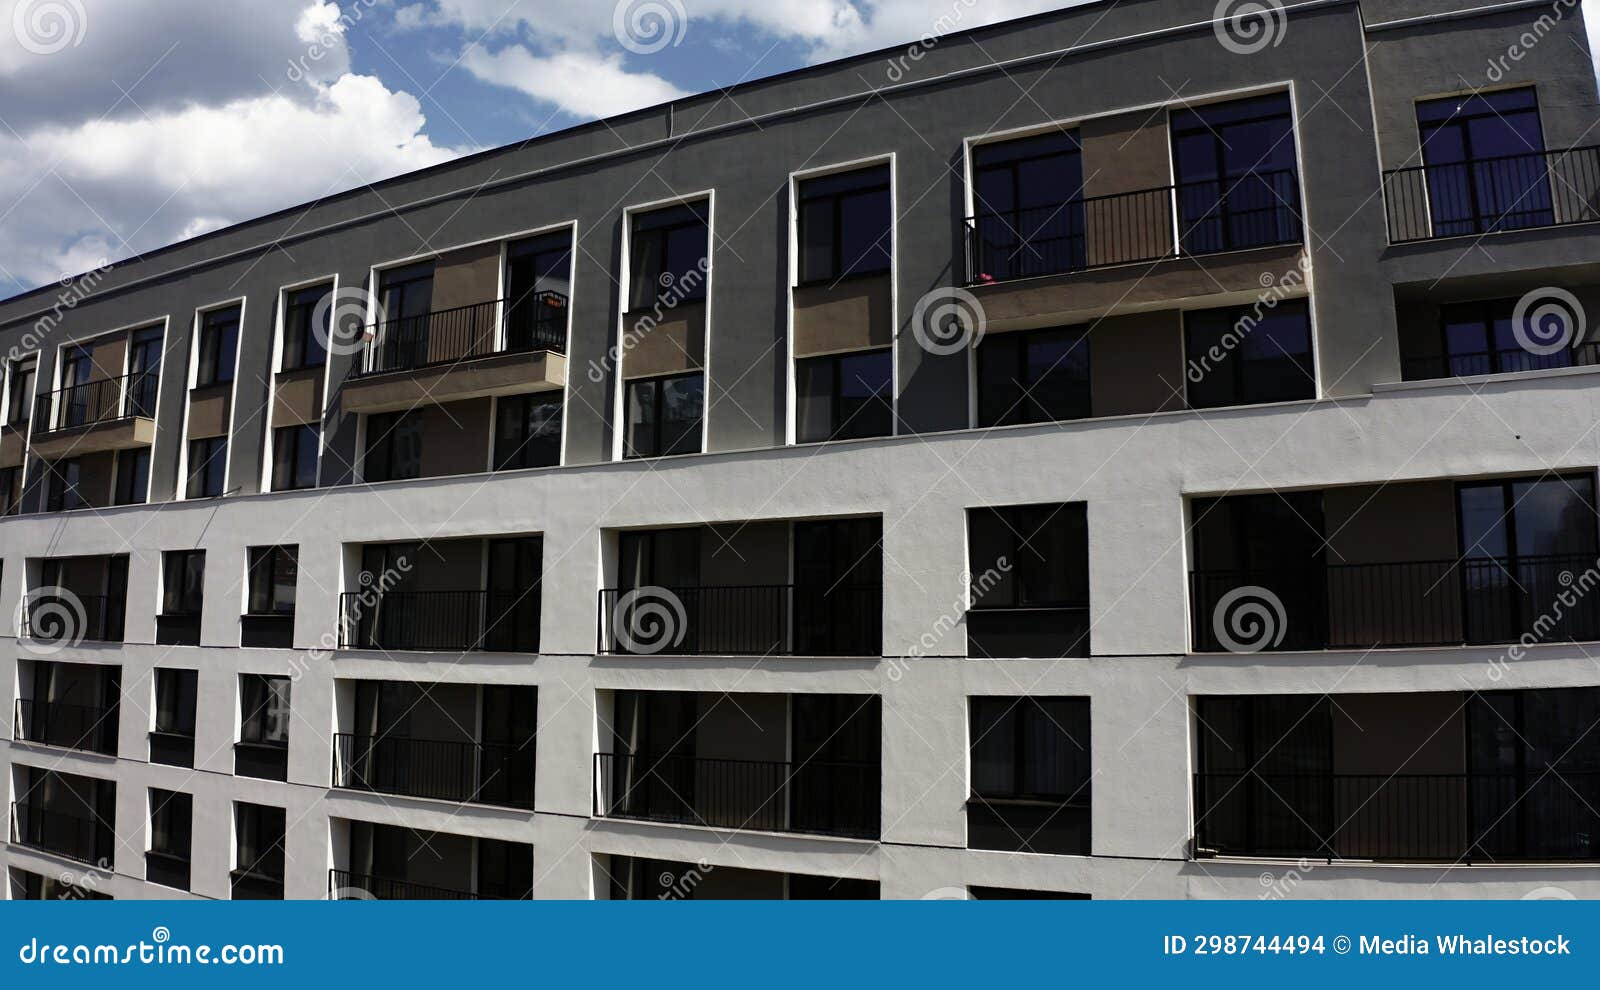 apartment blocks with balconies. stock footage. aerial view of an apartment building on a blue cloudy sky background.